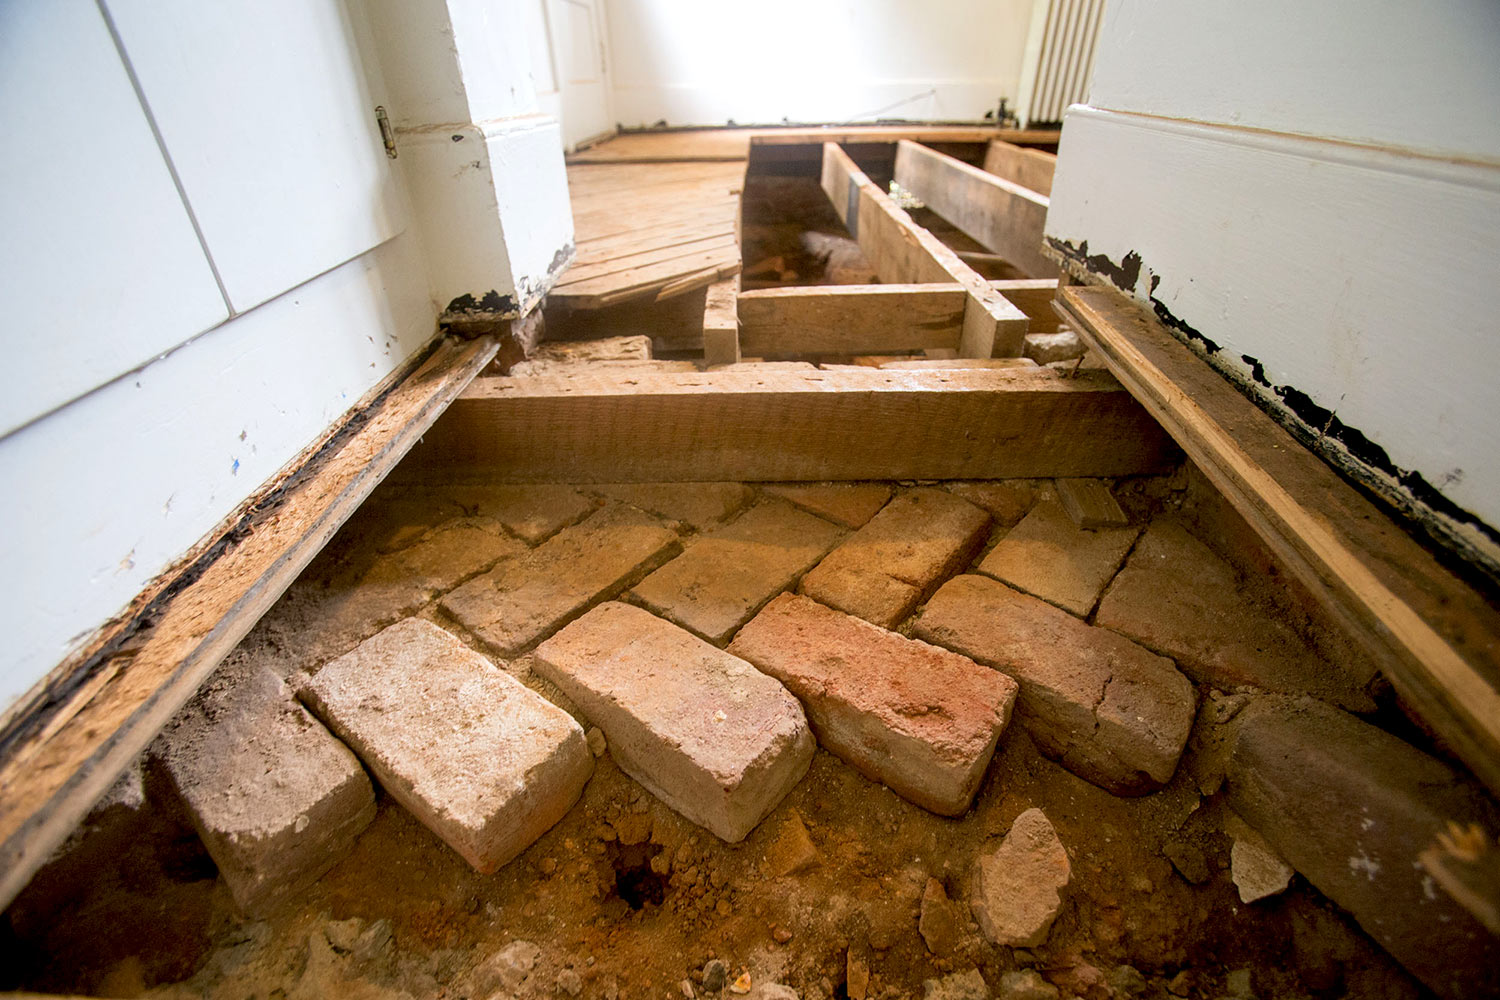 These bricks, laid in a herringbone pattern, are believed to be part of the original floor for the kitchen structure, which became the central room when The Mews was expanded.